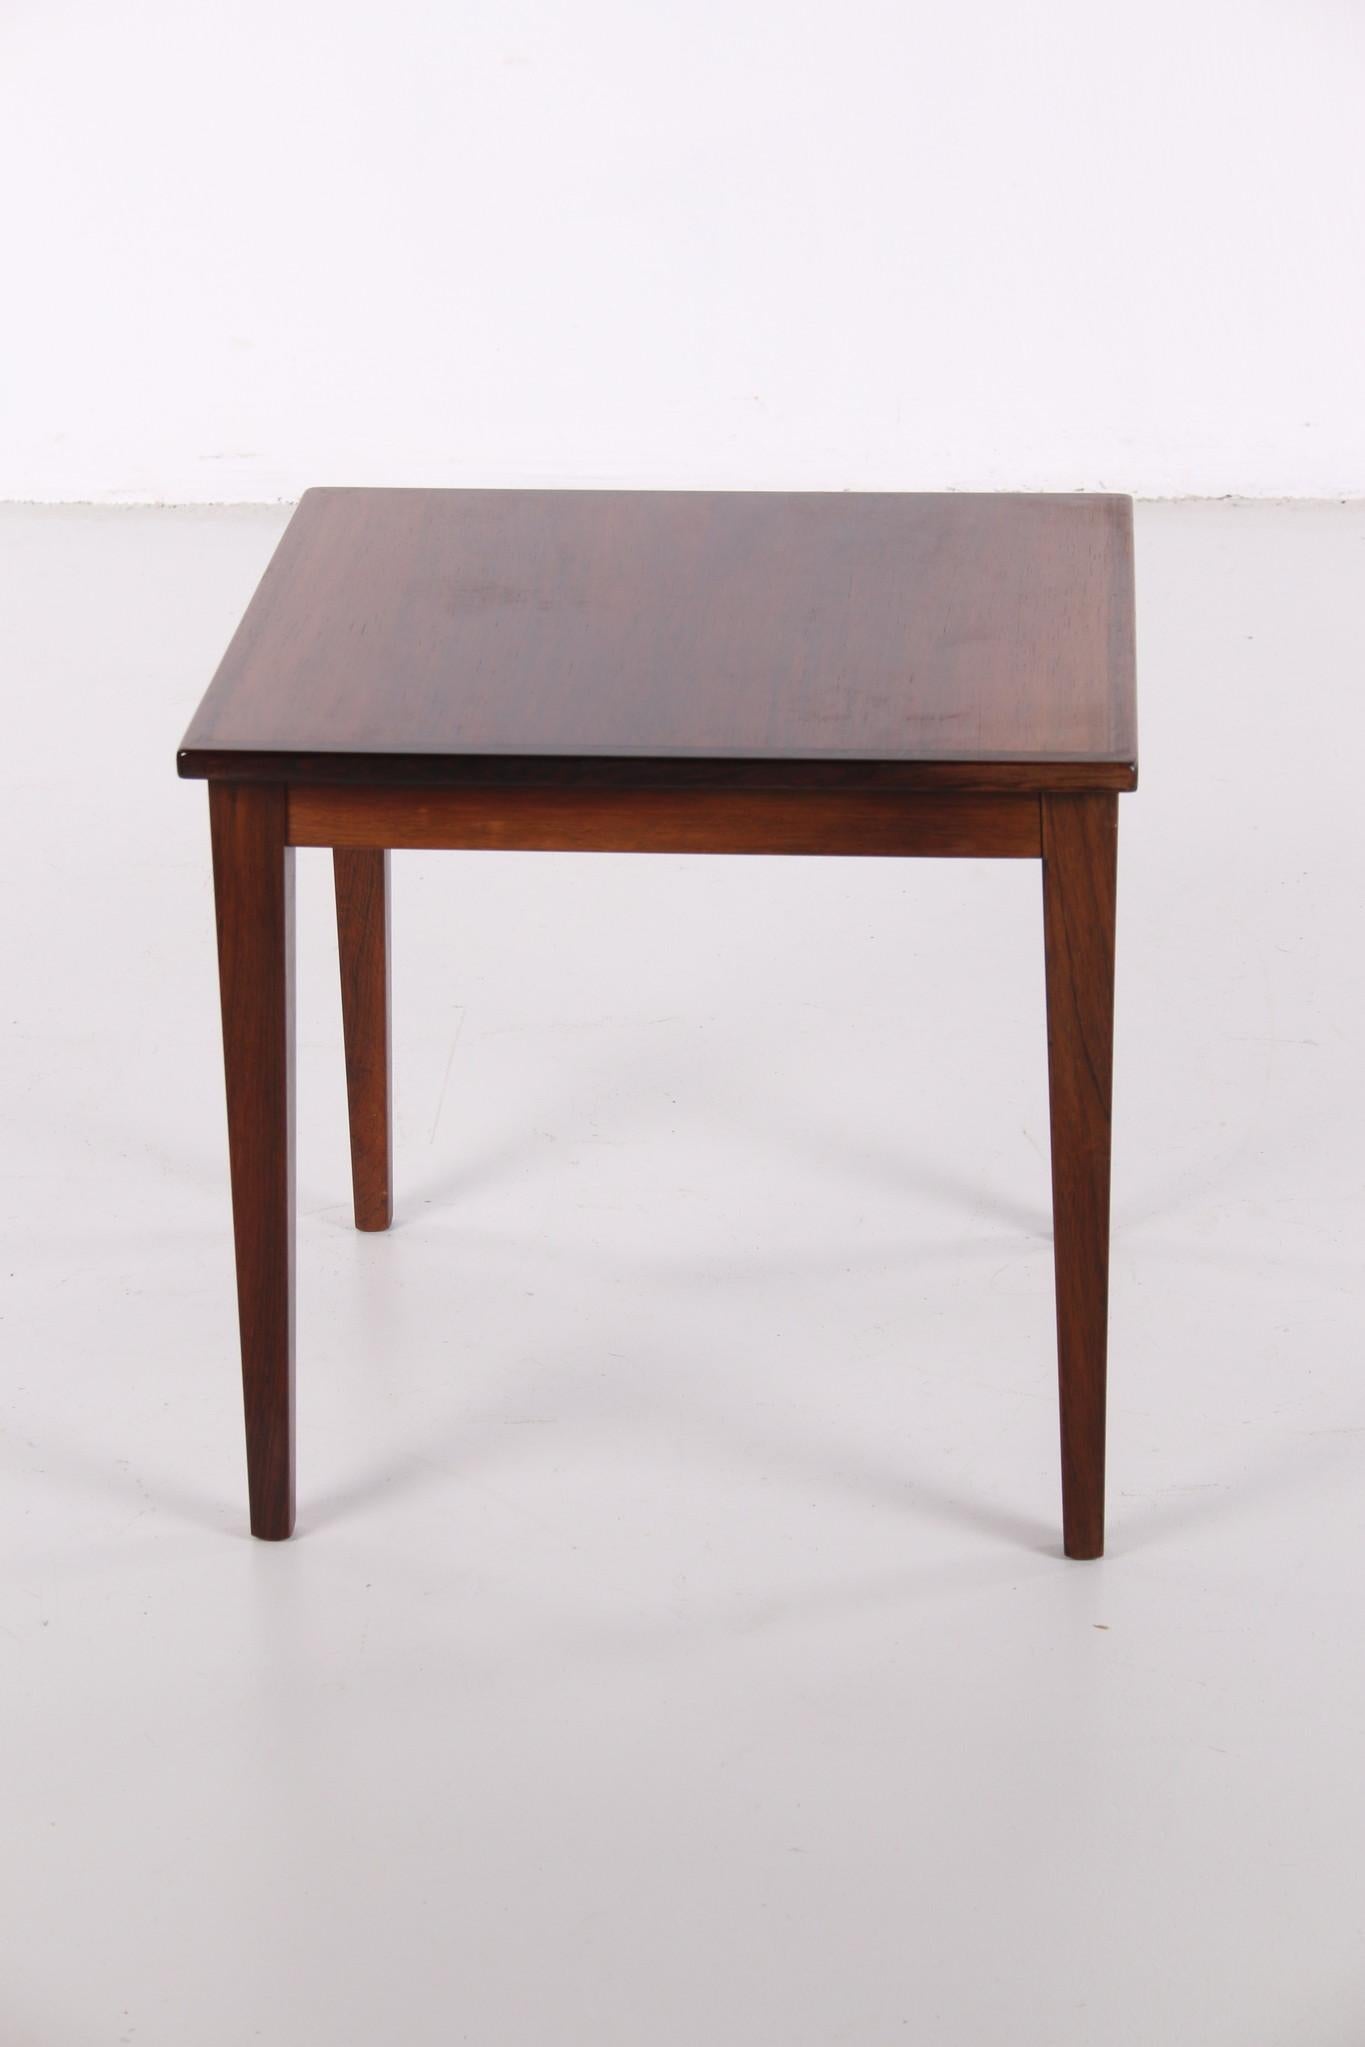 Black wood Plant Table or Side Table, 1960s For Sale 2